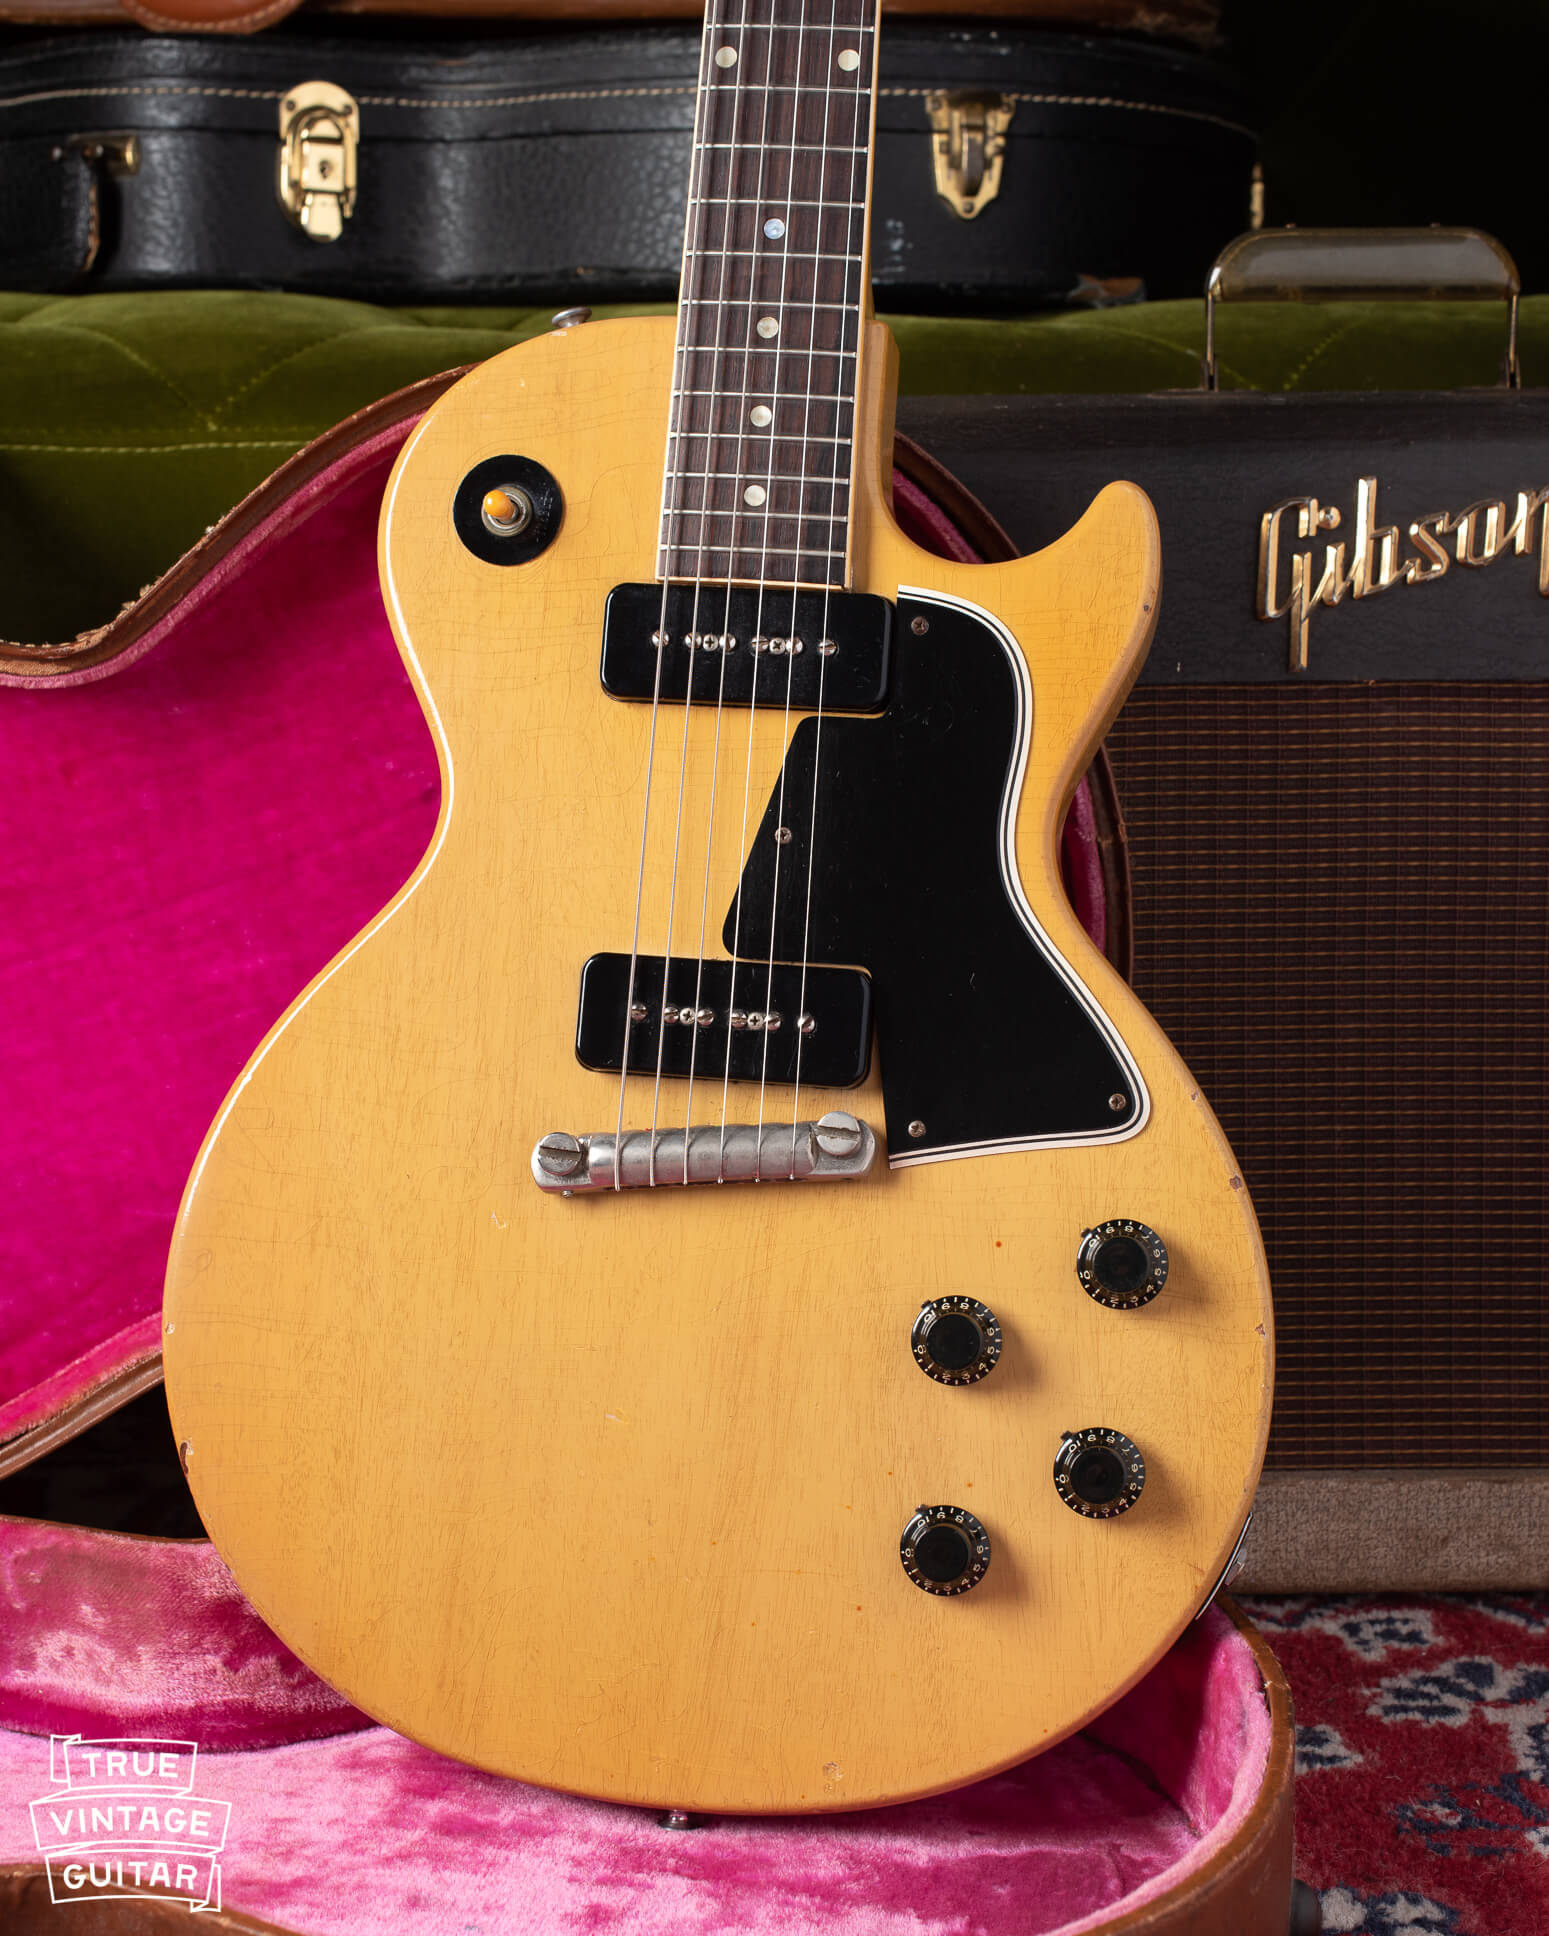 1956 Gibson Les Paul Special with single cutaway body style